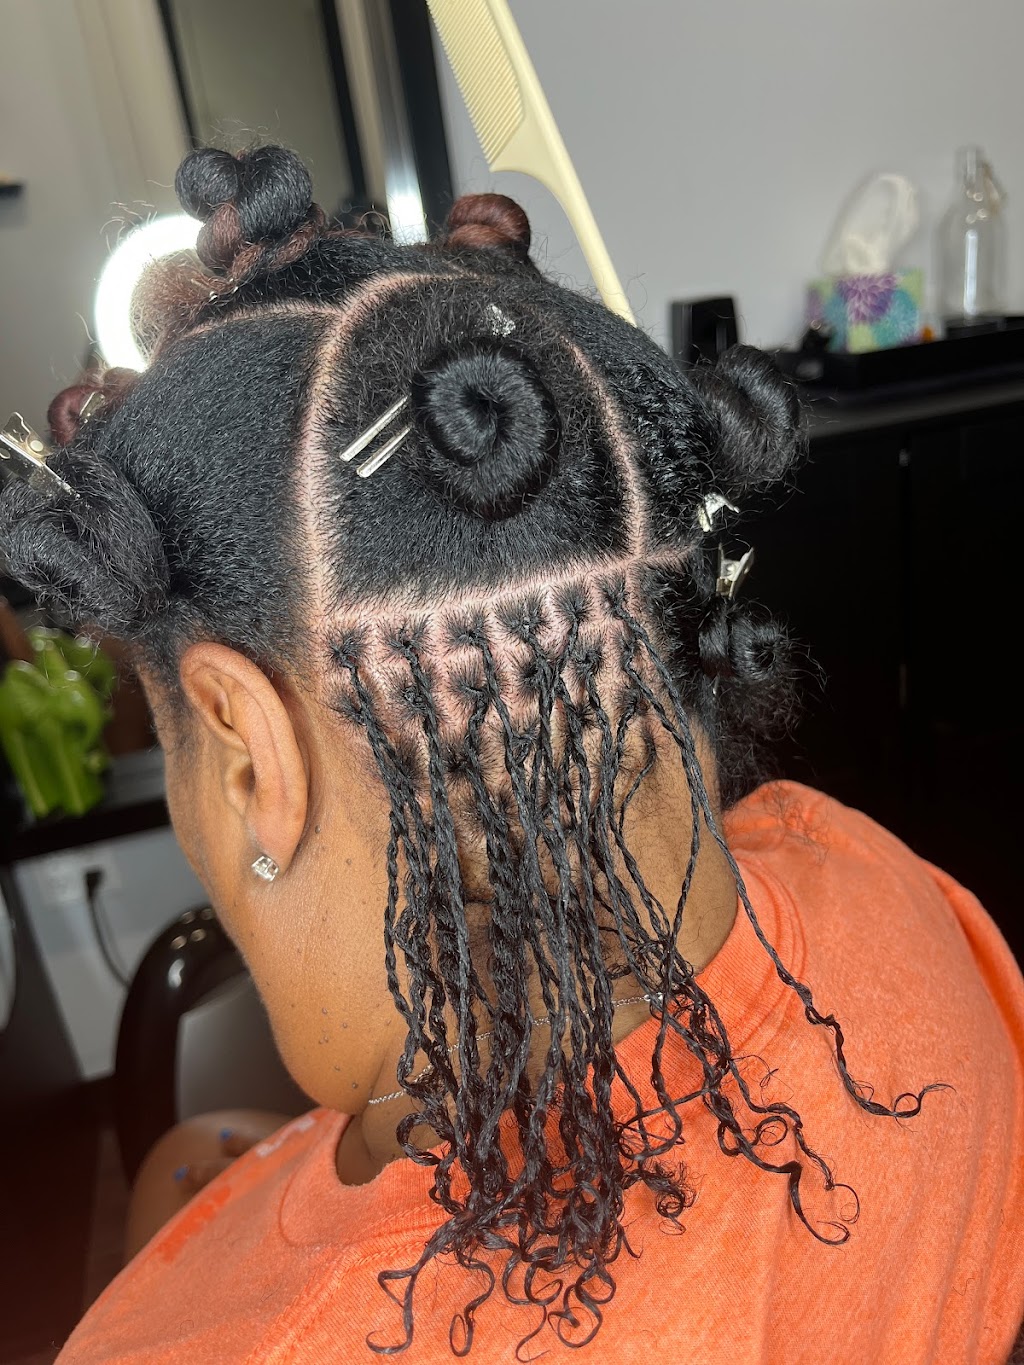 Textured Touch Inc | 1500 Almonesson Rd Space 26 Suite 441, Deptford, NJ 08096 | Phone: (856) 515-8715